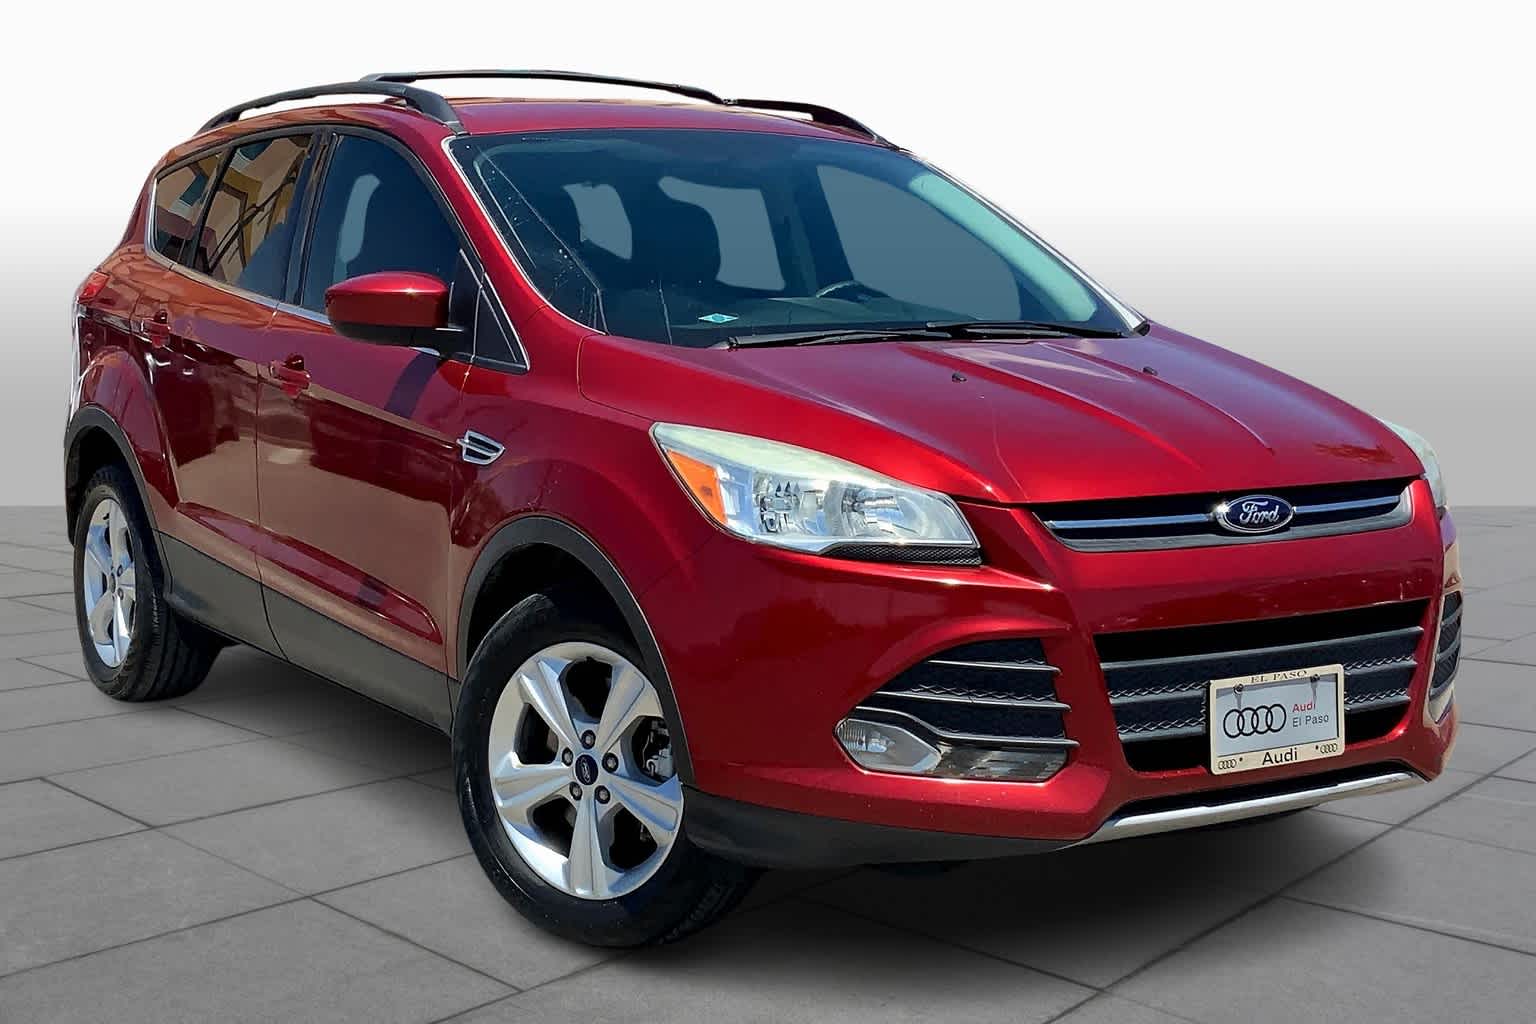 Used 2014 Ford Escape SE with VIN 1FMCU0G96EUB97757 for sale in El Paso, TX